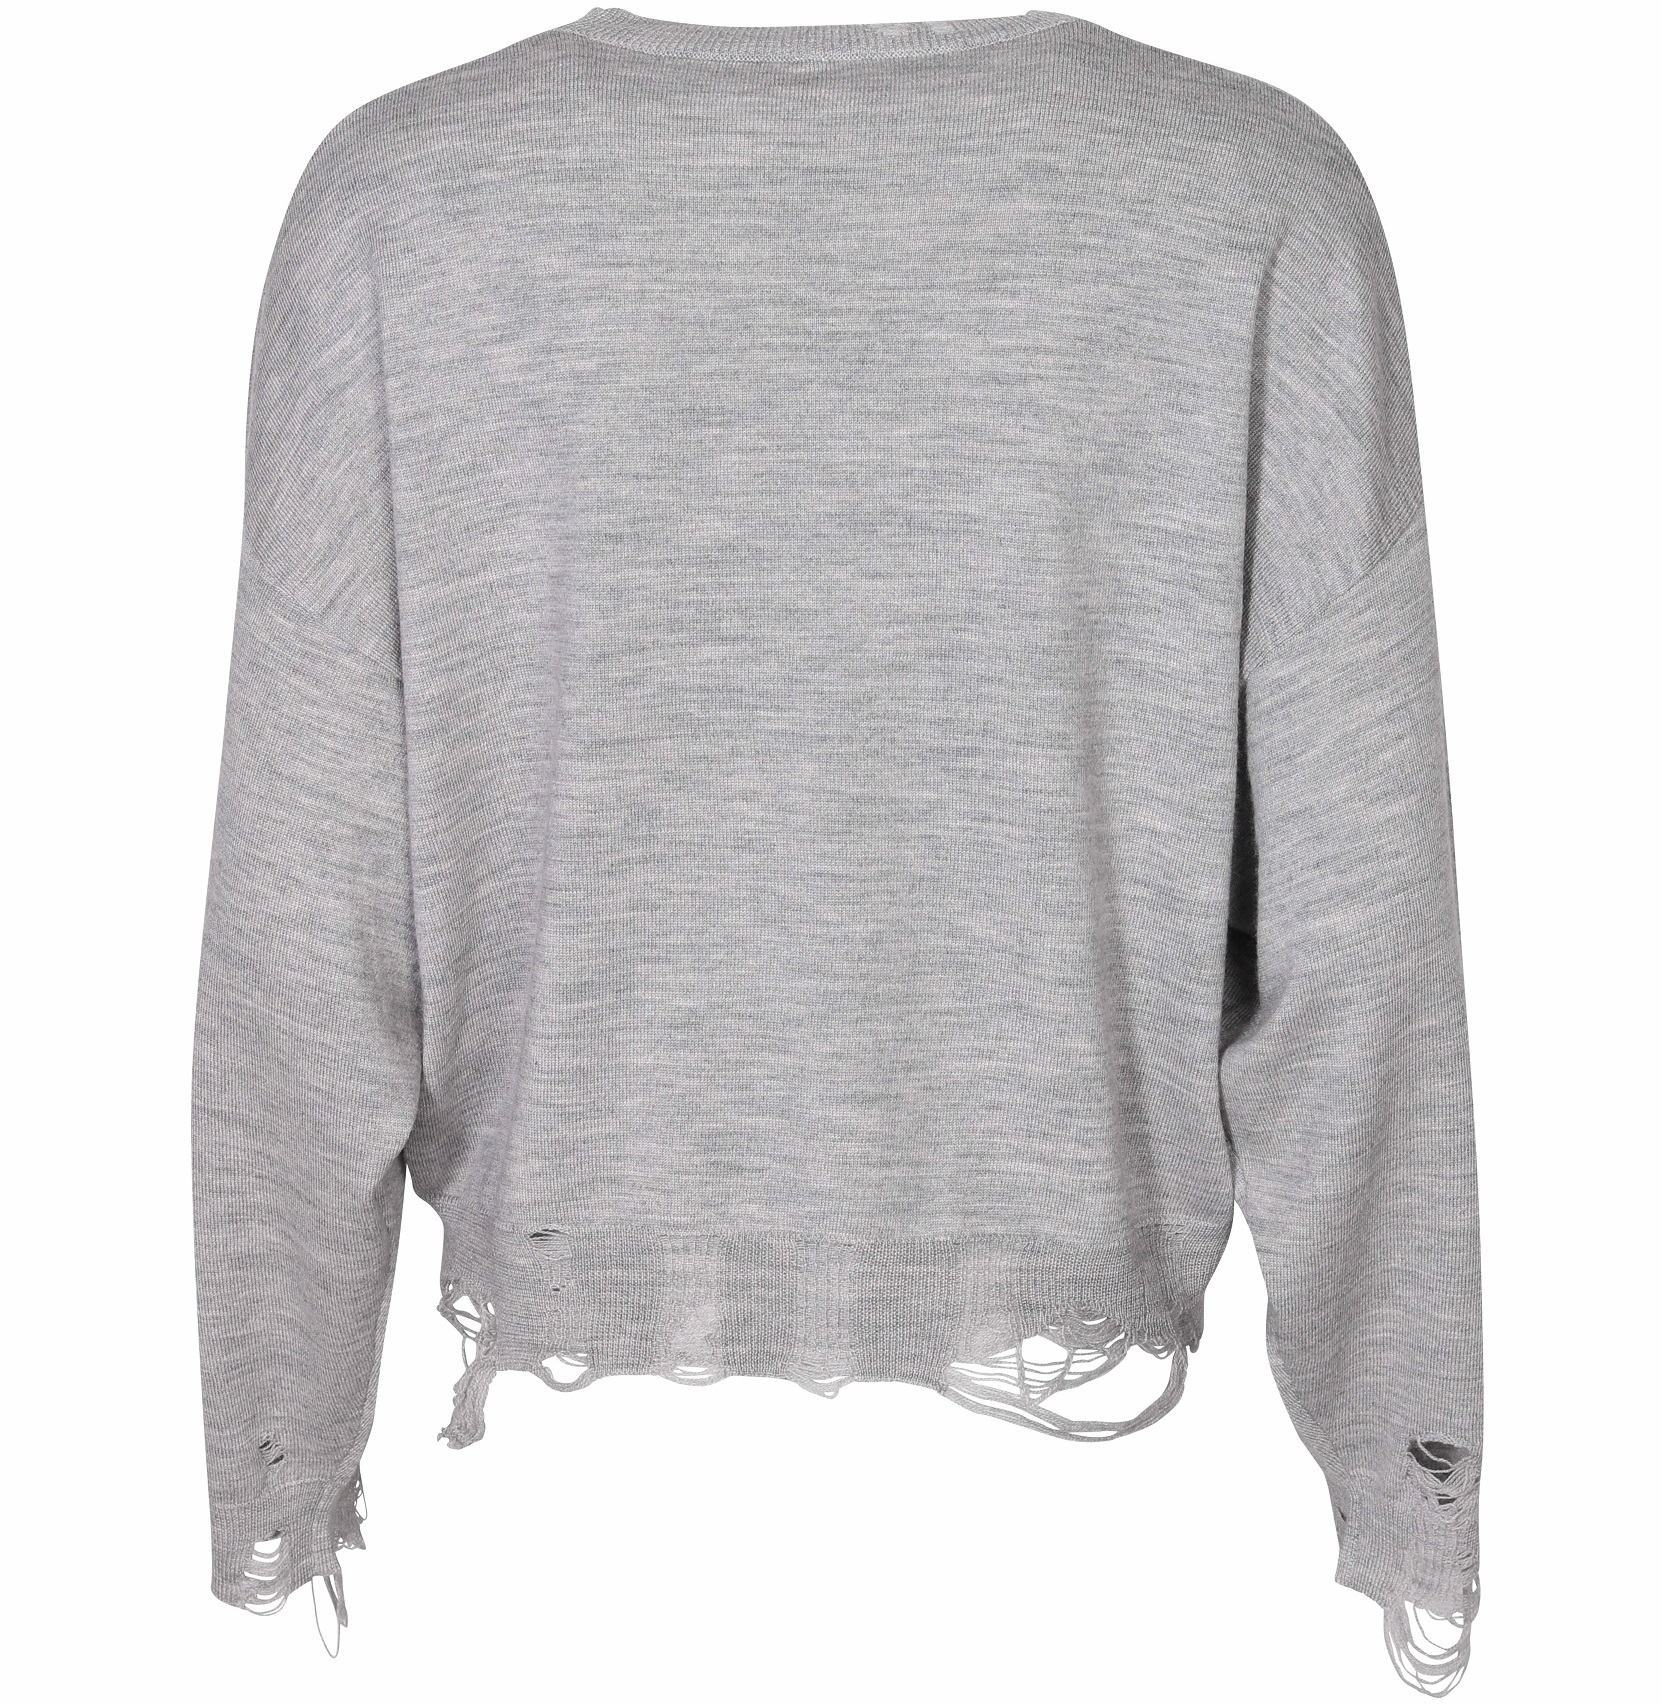 R13 Distressed Cropped Oversize Pullover in Heathergrey M